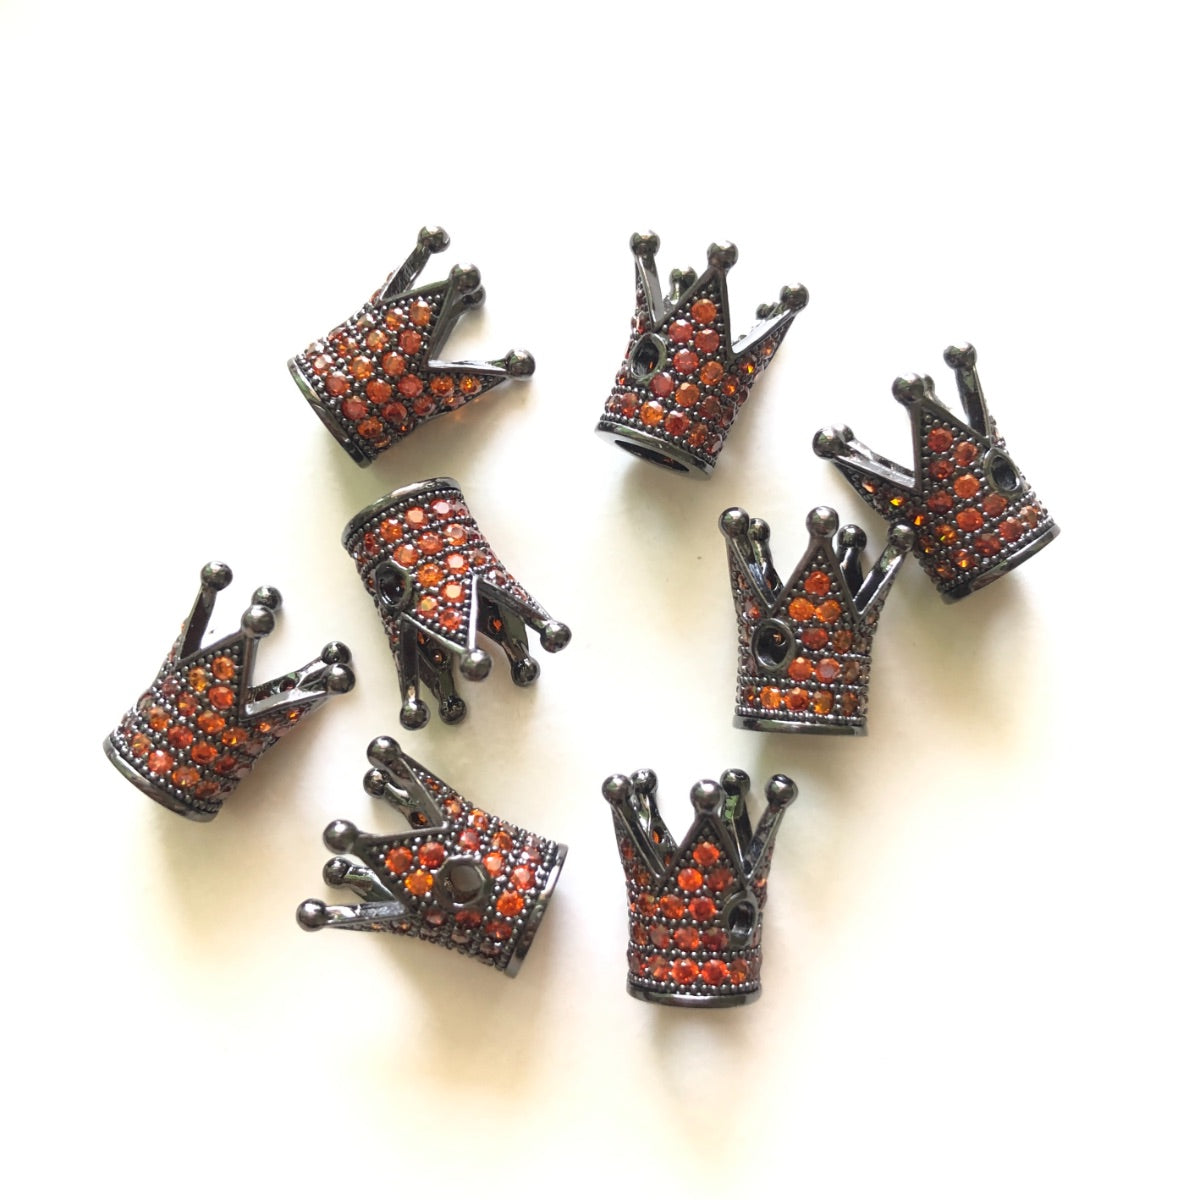 10pcs/lot Reddish Orange CZ Paved Crown Spacers Black CZ Paved Spacers Colorful Zirconia Crown Beads Charms Beads Beyond